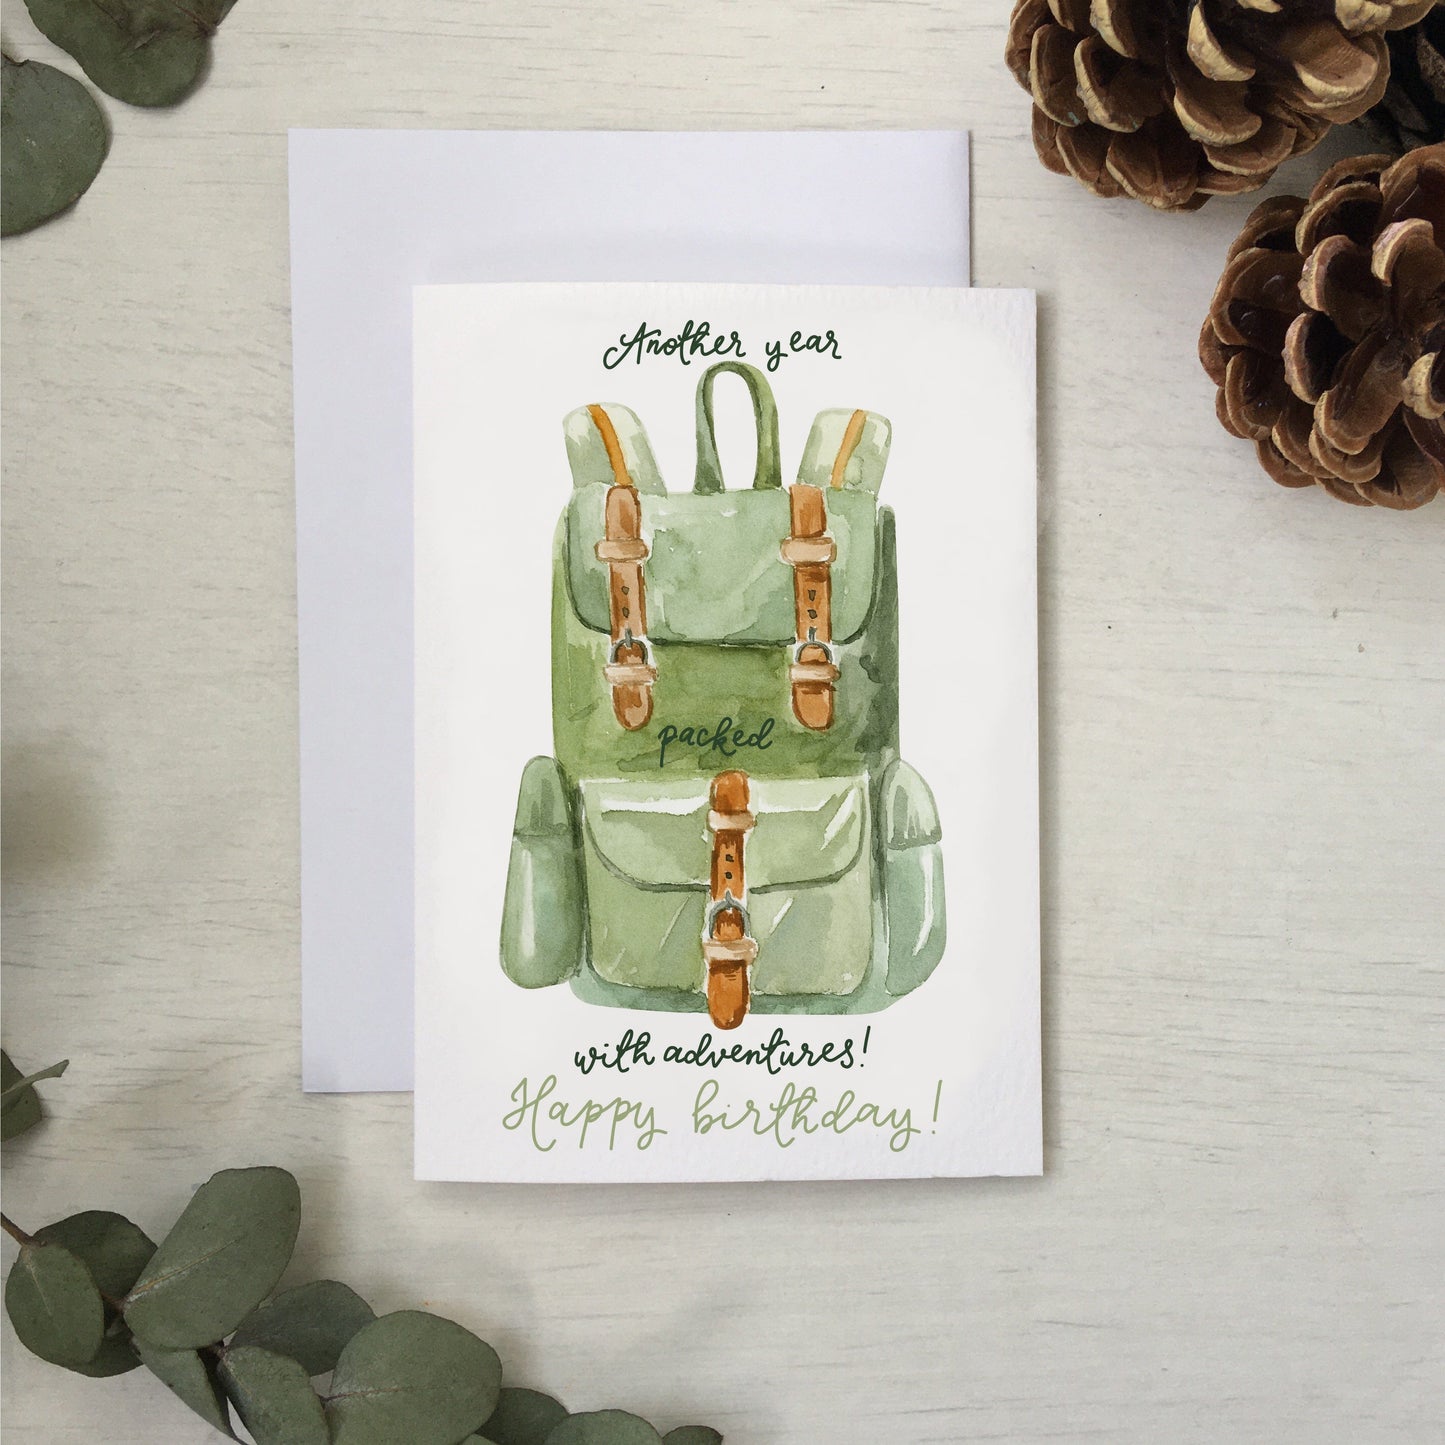 And Hope Designs Another year packed with adventures birthday card